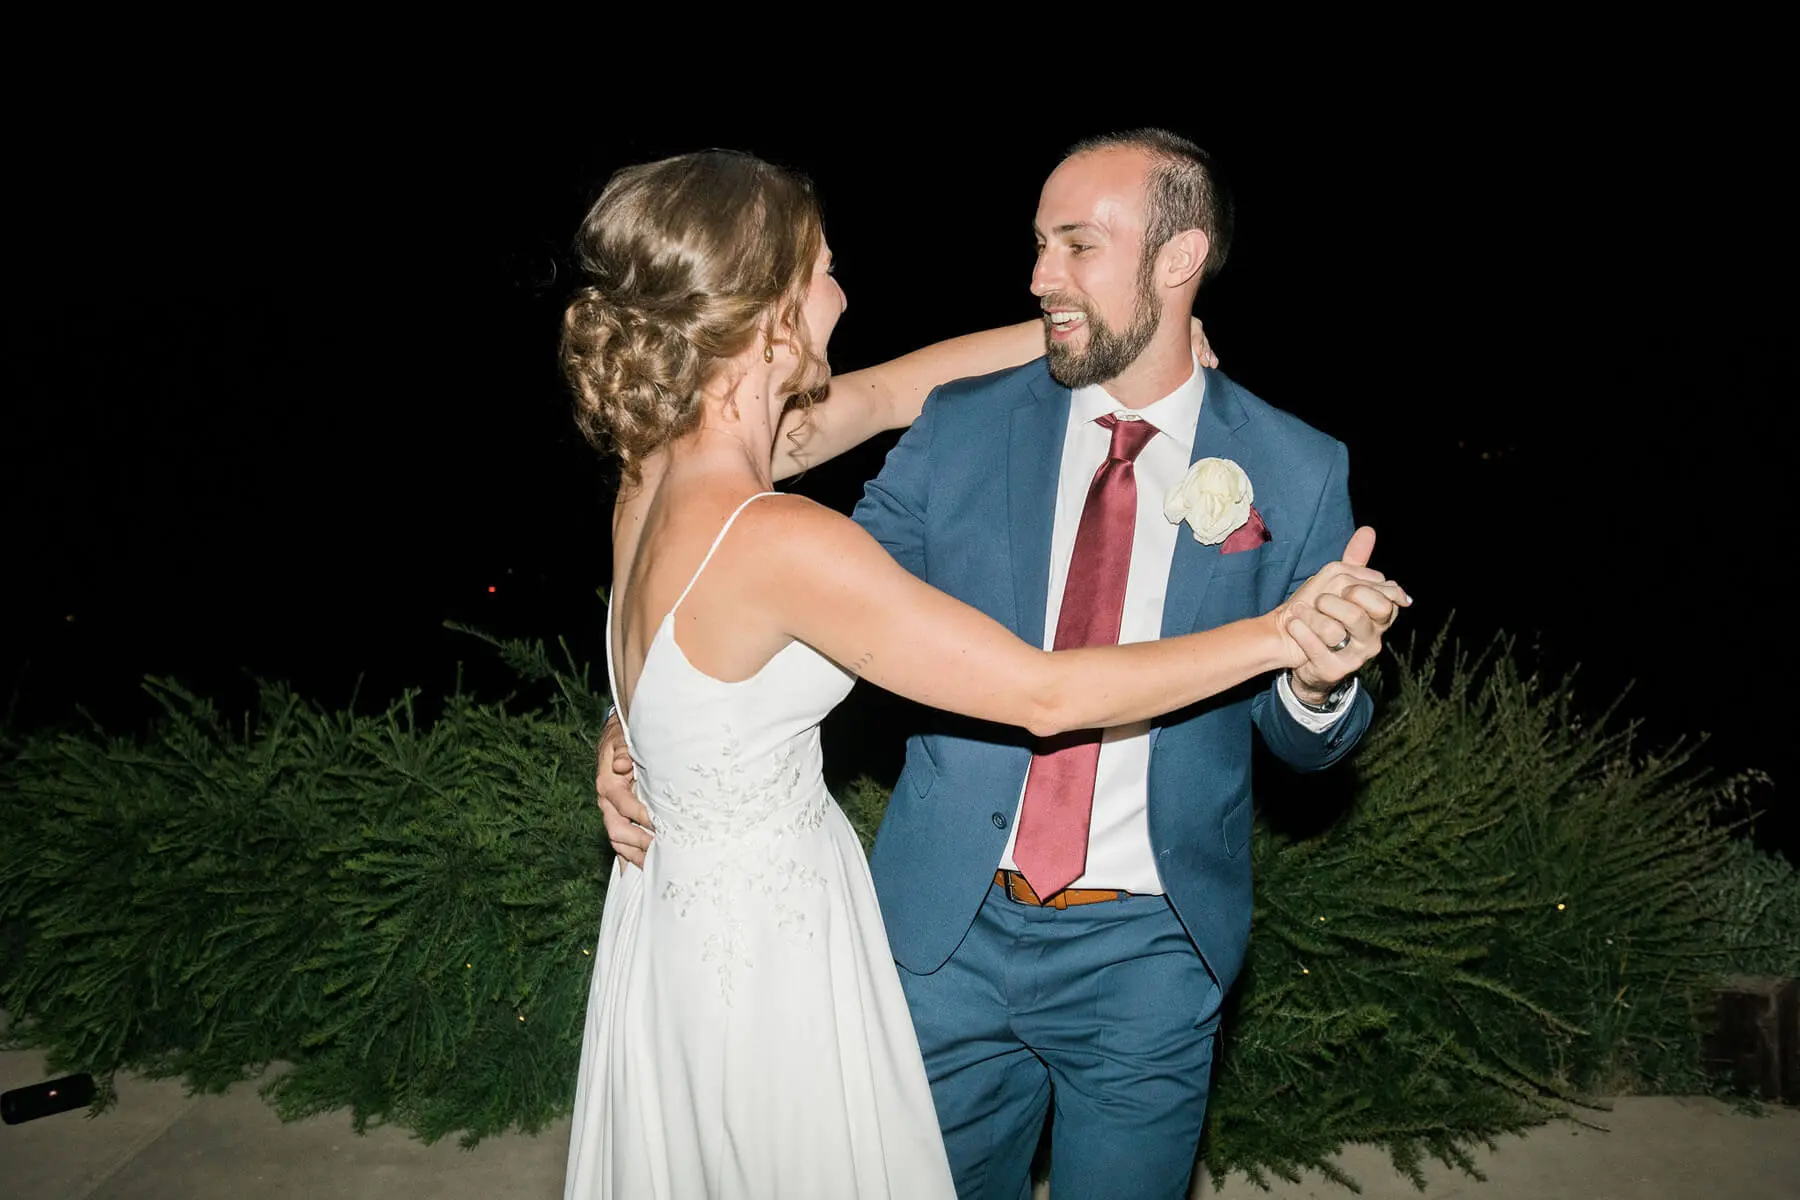 bride and groom doing first dance at intimate wedding reception in oakhurst